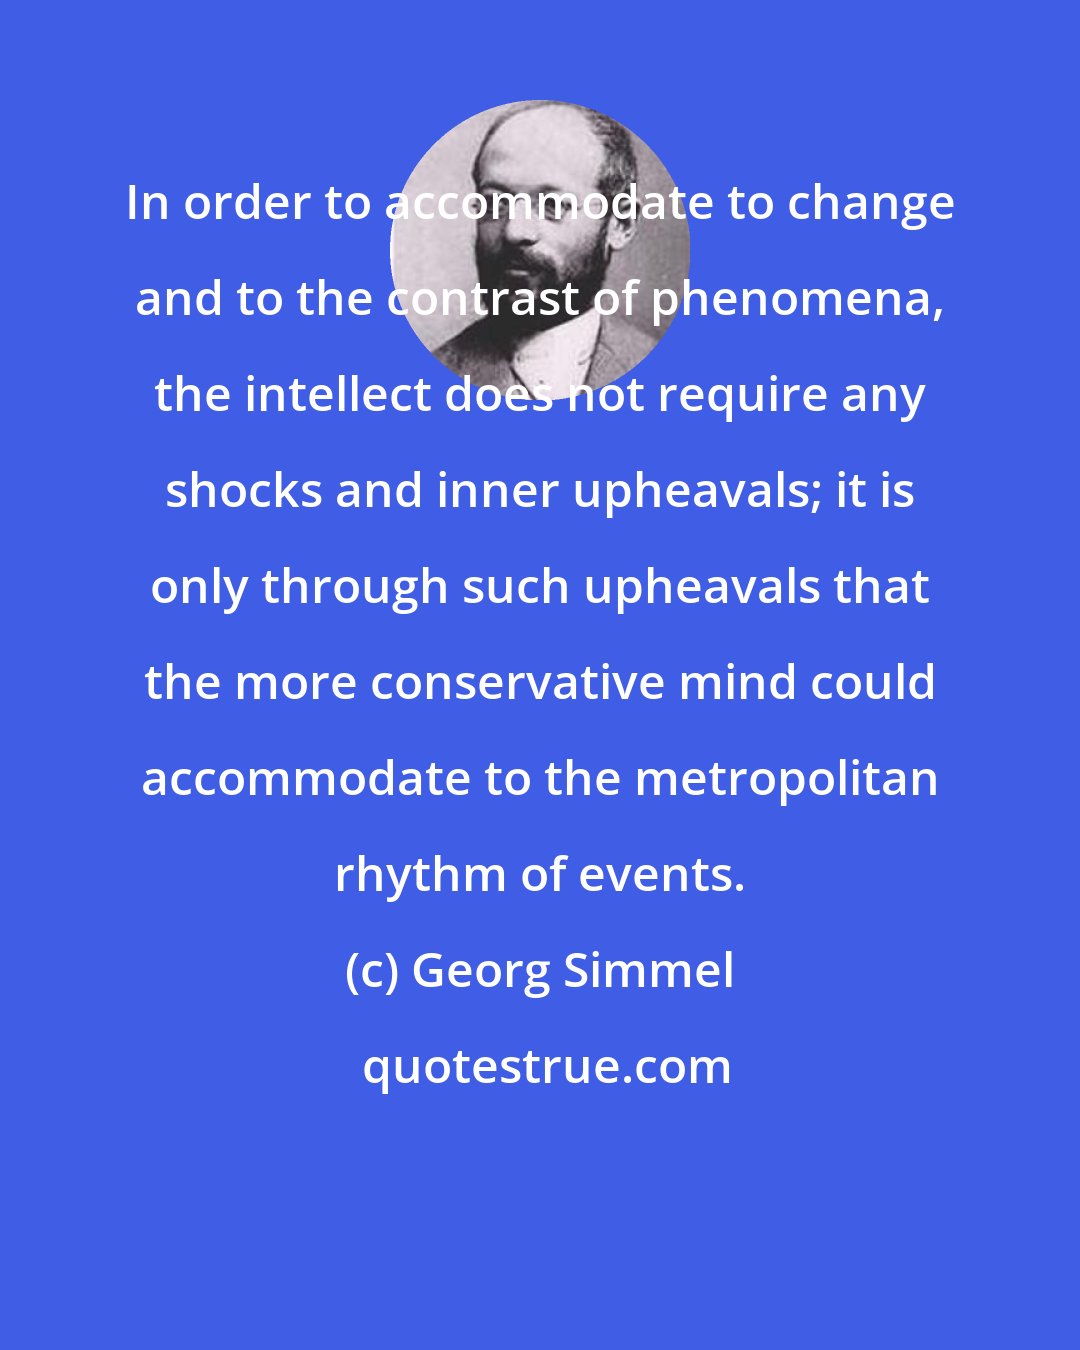 Georg Simmel: In order to accommodate to change and to the contrast of phenomena, the intellect does not require any shocks and inner upheavals; it is only through such upheavals that the more conservative mind could accommodate to the metropolitan rhythm of events.